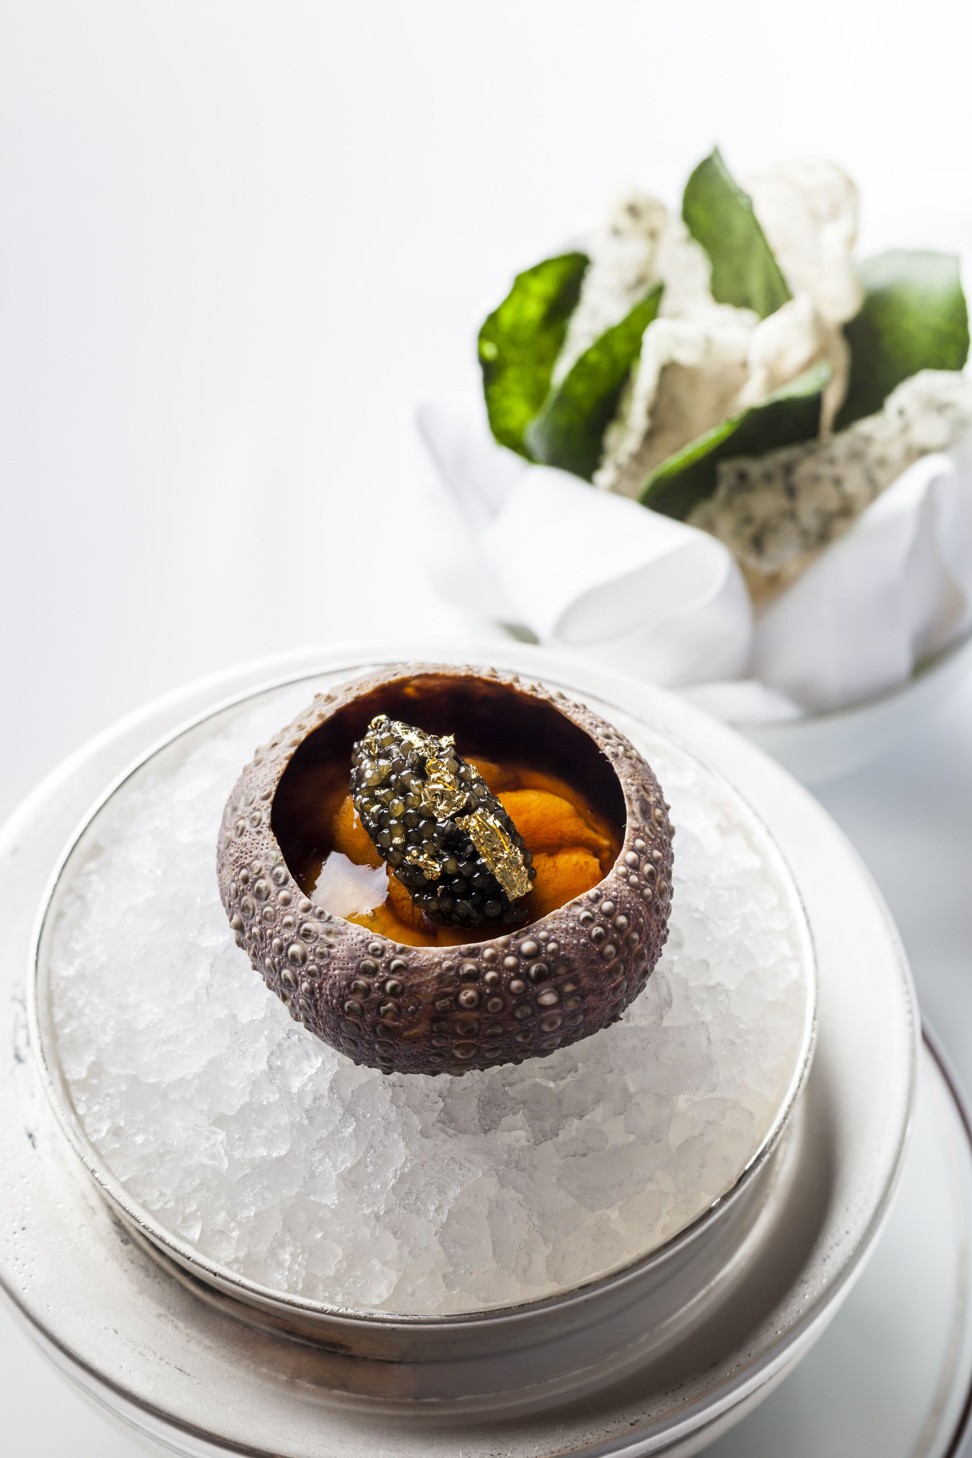 Hokkaido sea urchin, one of the signature dishes in Amber’s 14-course menu this week. Photo: Bernice Chan